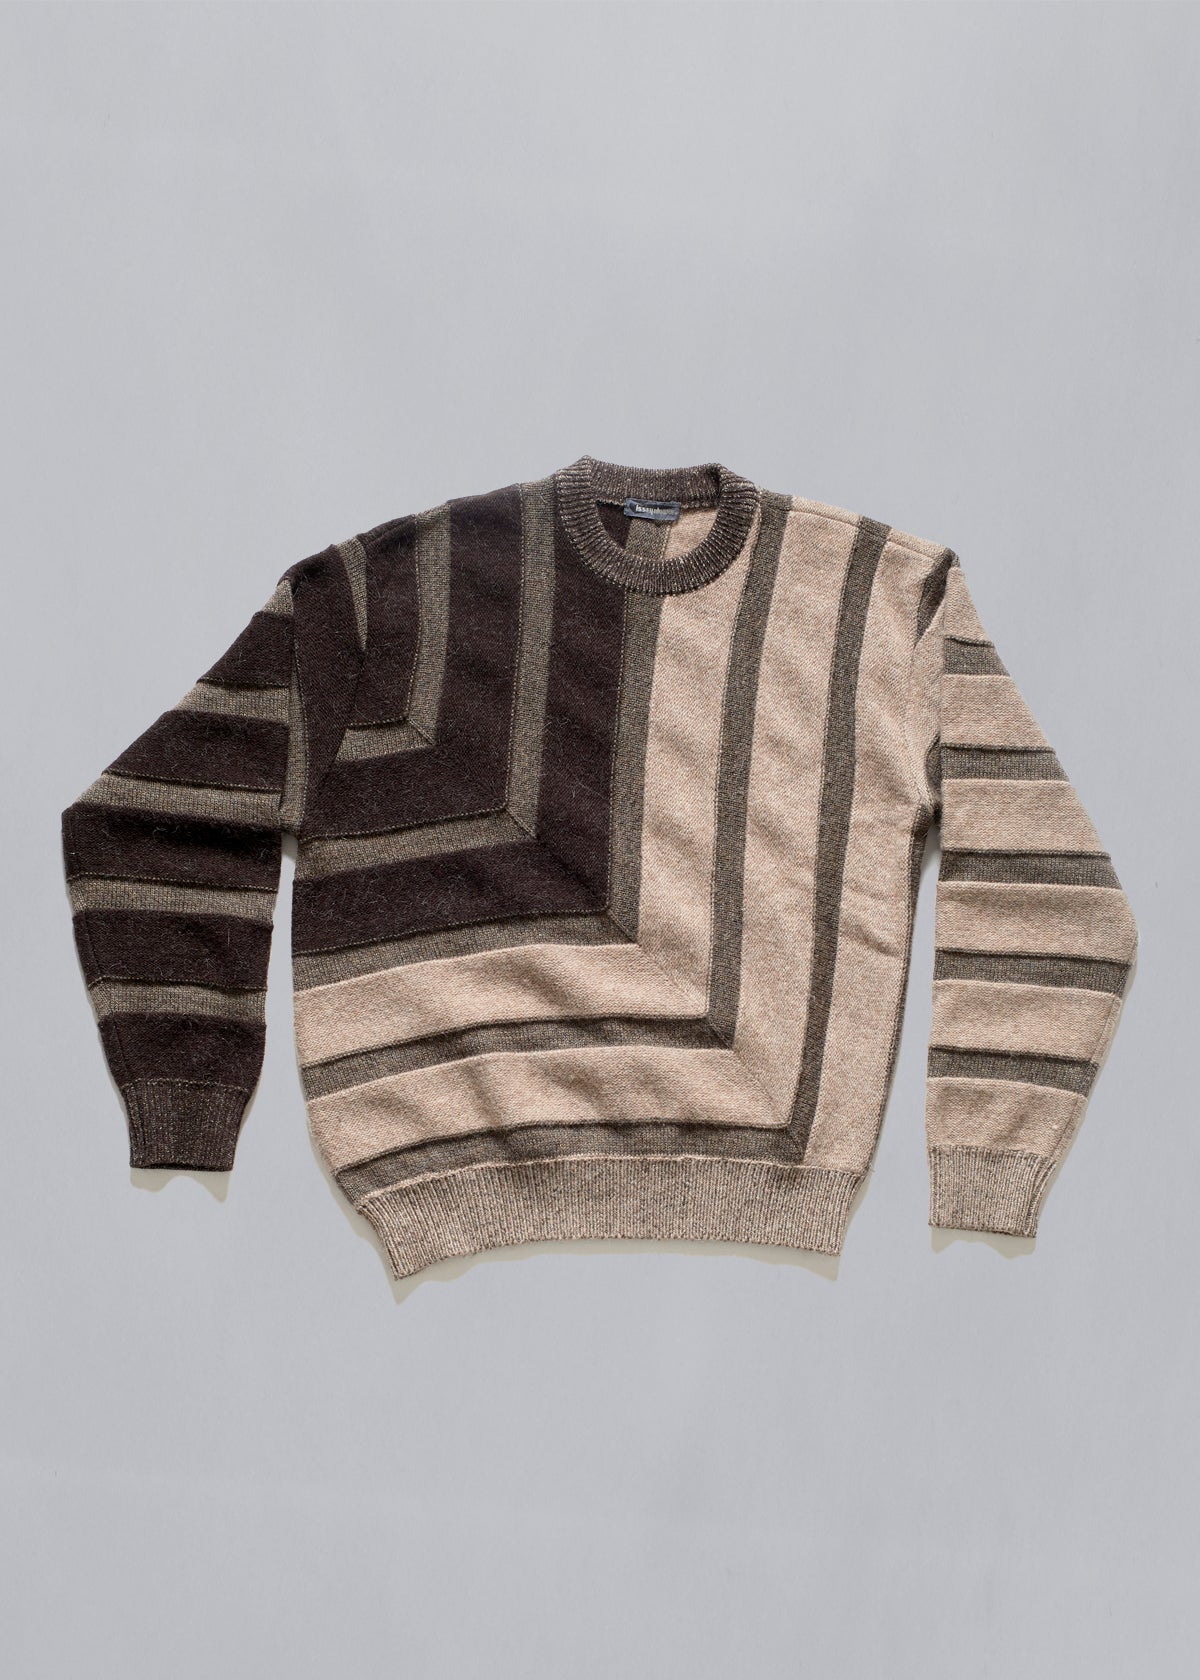 Mixed Lines 3D Wool Crewneck Knit 1980's - Large